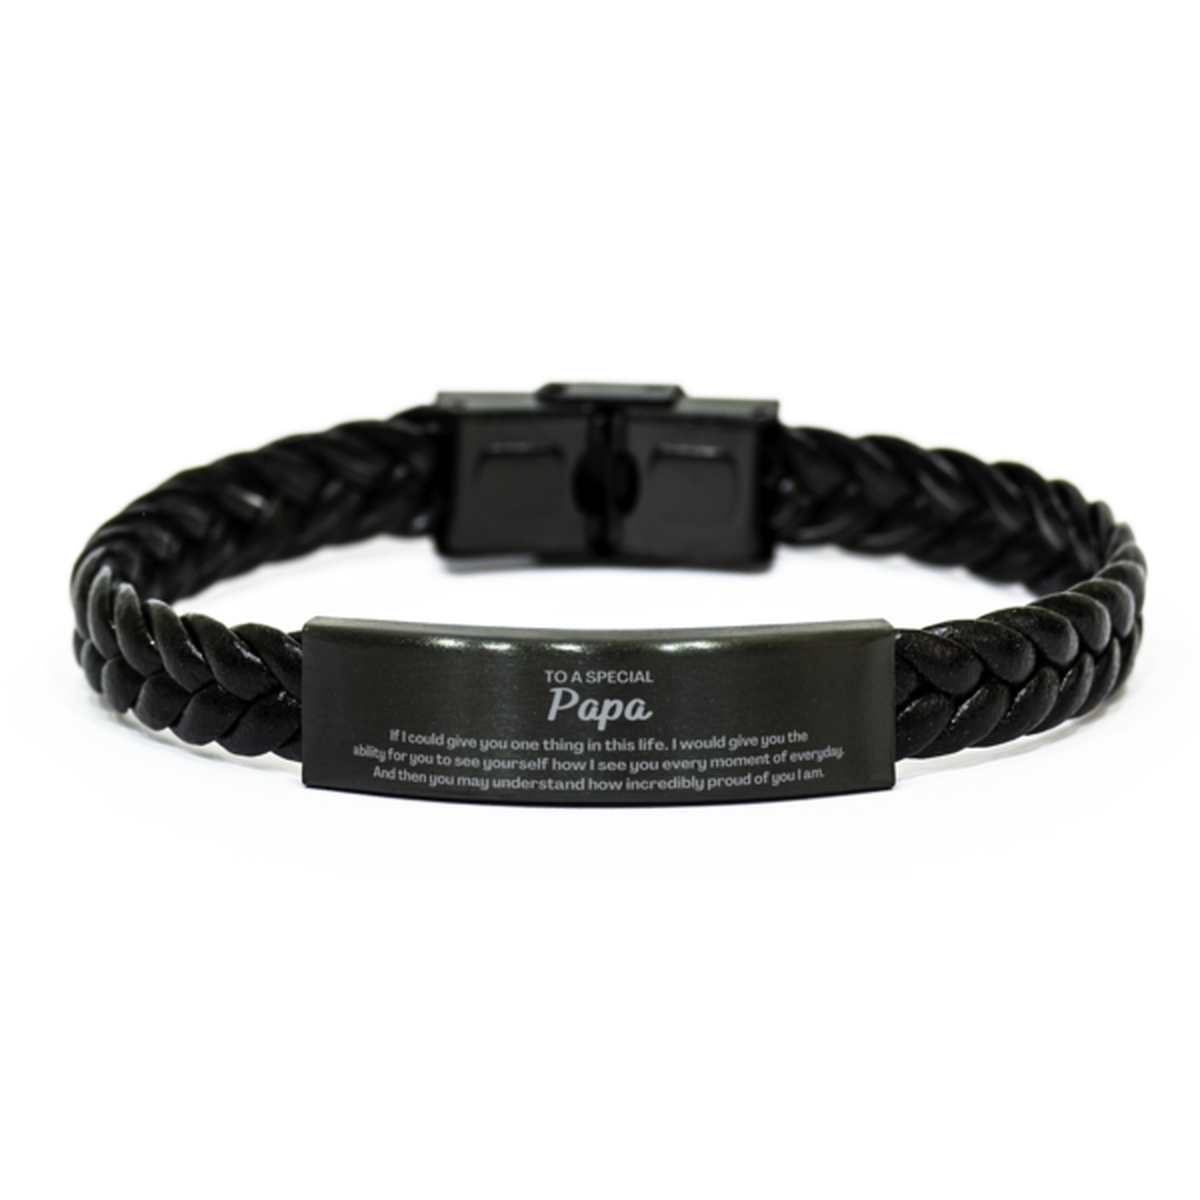 To My Papa Braided Leather Bracelet, Gifts For Papa Engraved, Inspirational Gifts for Christmas Birthday, Epic Gifts for Papa To A Special Papa how incredibly proud of you I am